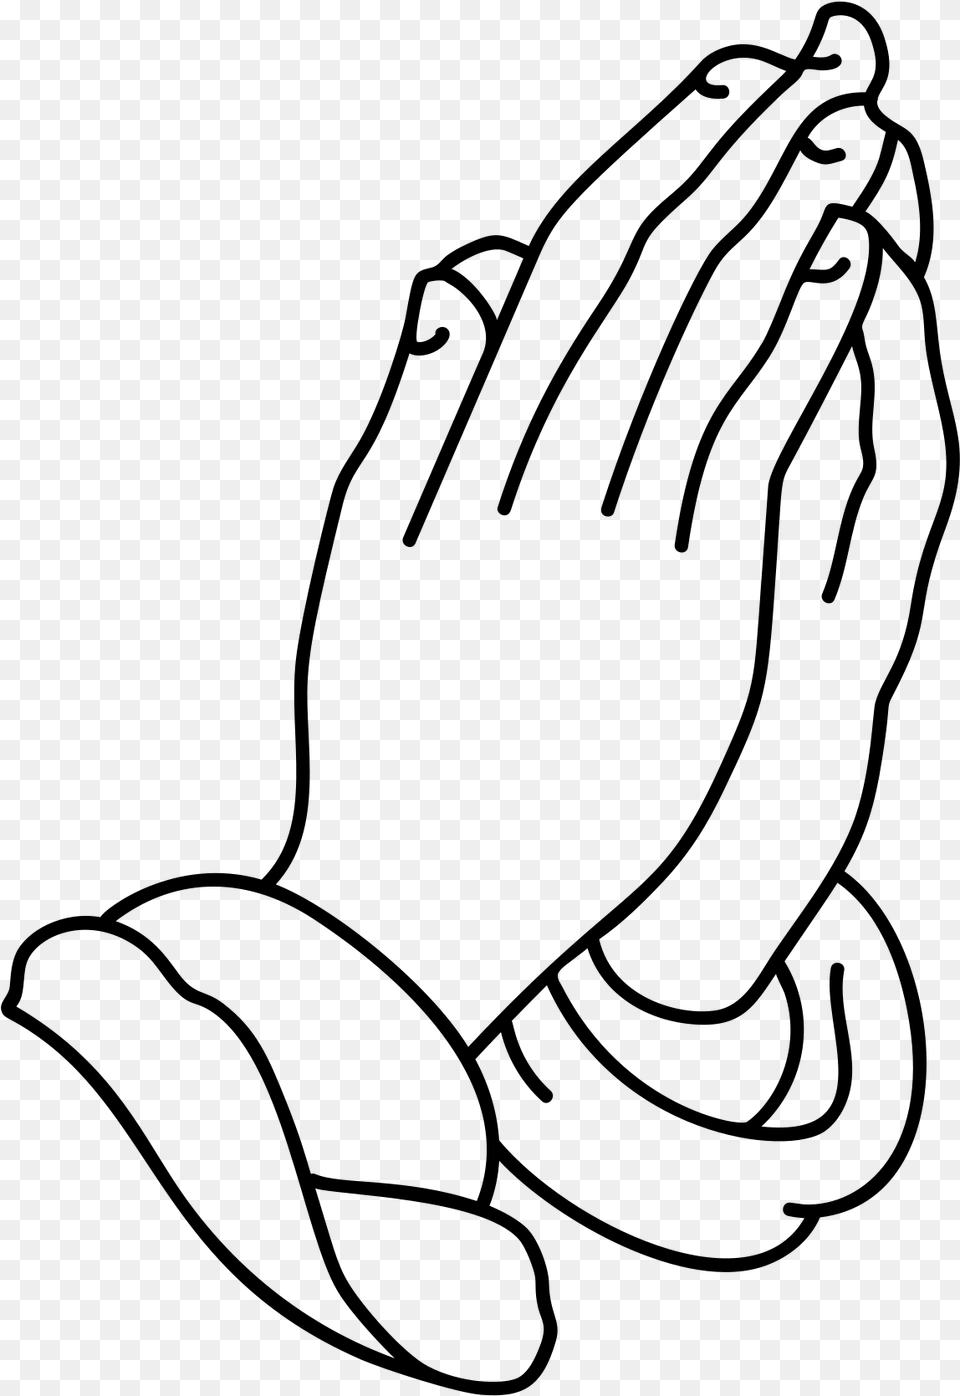 Praying Hands Lineart Black And White Clip Art Praying Hands And Cross, Gray Free Png Download